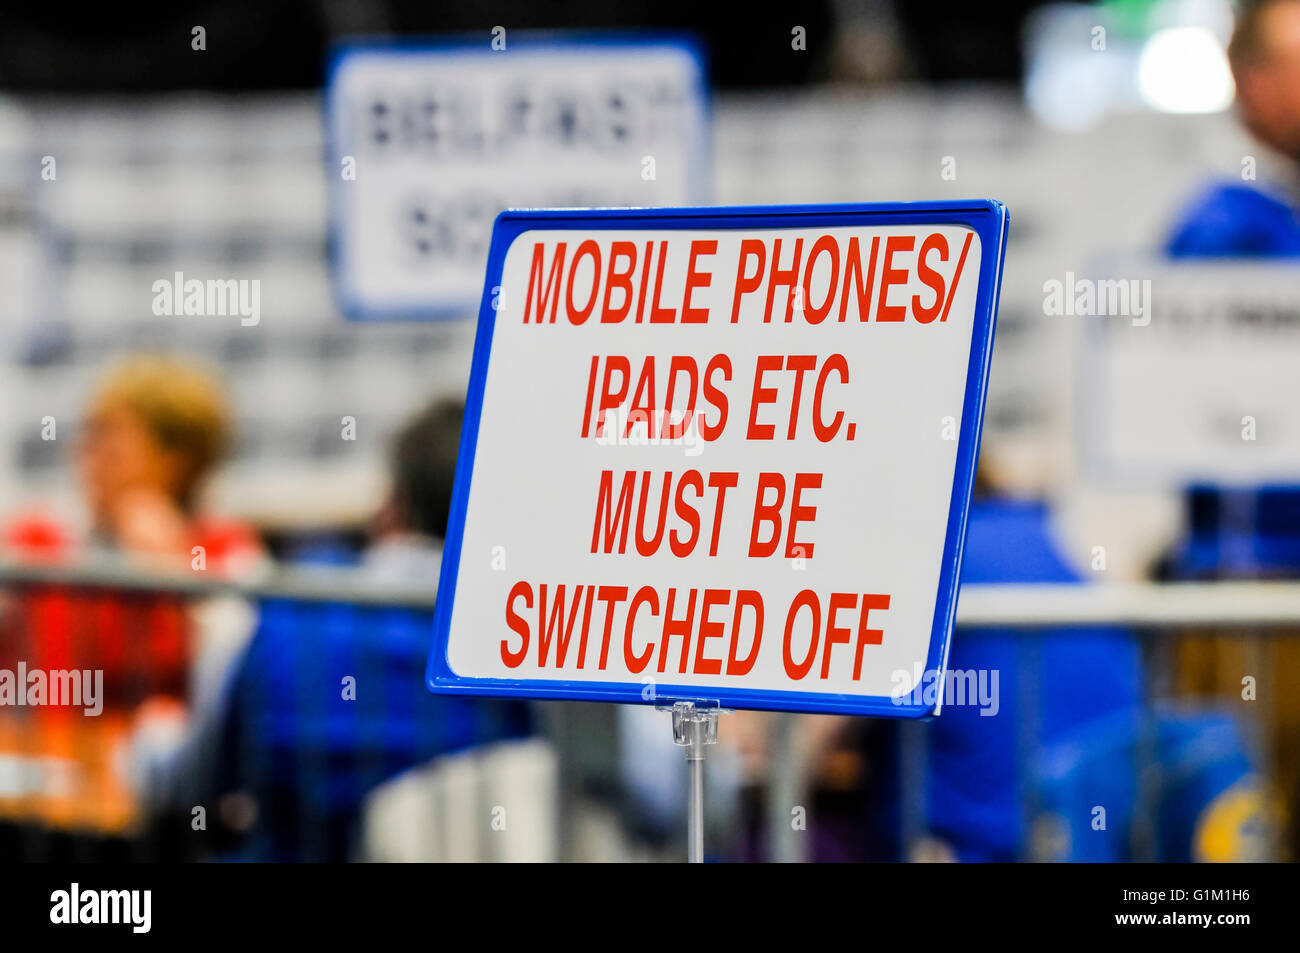 Sign in a secure area warning that mobile phones and ipads, etc. must be switched off. Stock Photo